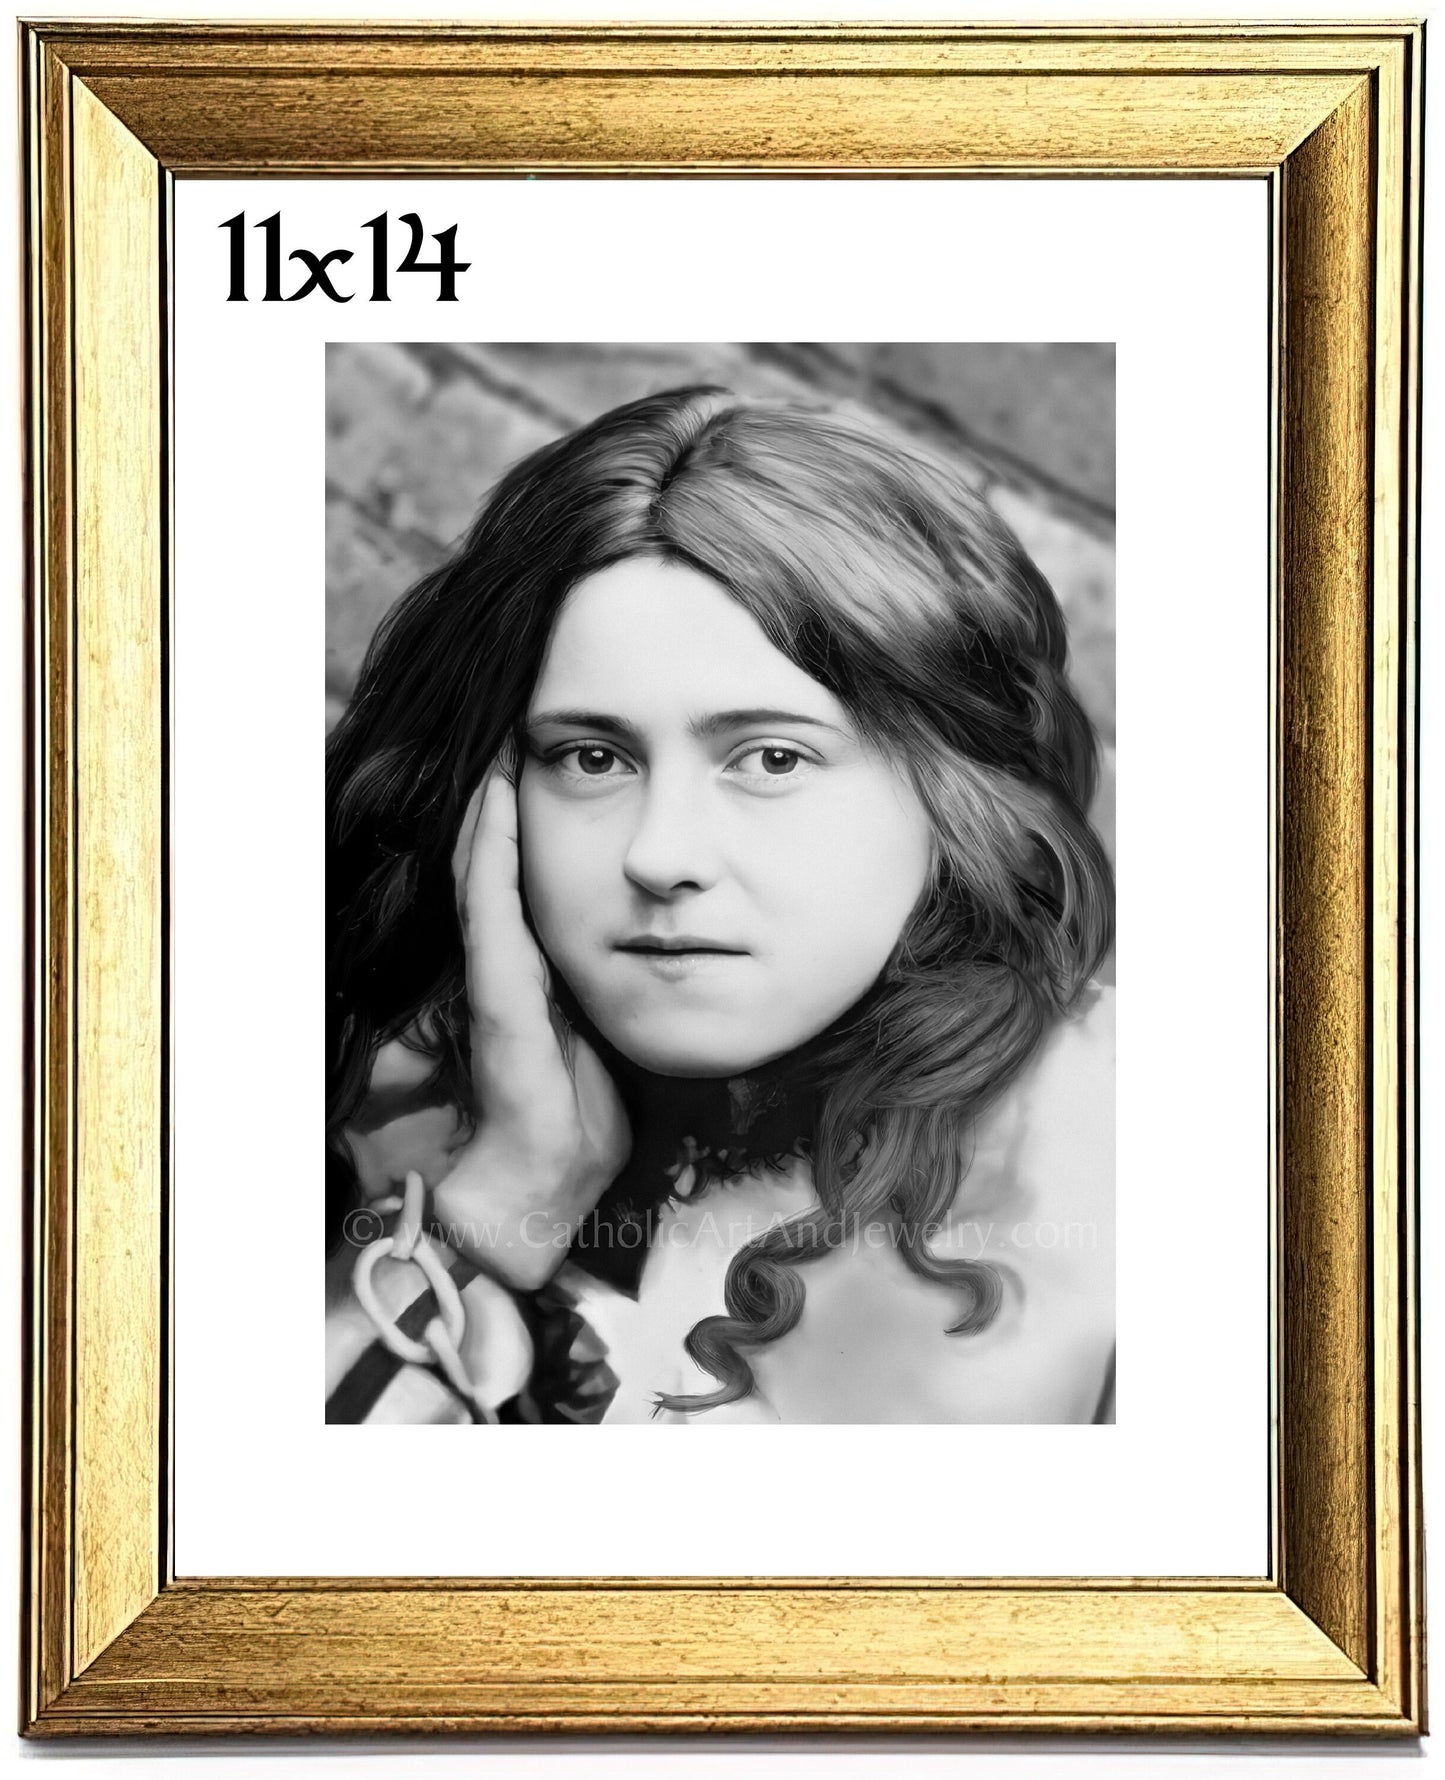 St Therese as Joan of Arc – Exclusive Photo Restoration!